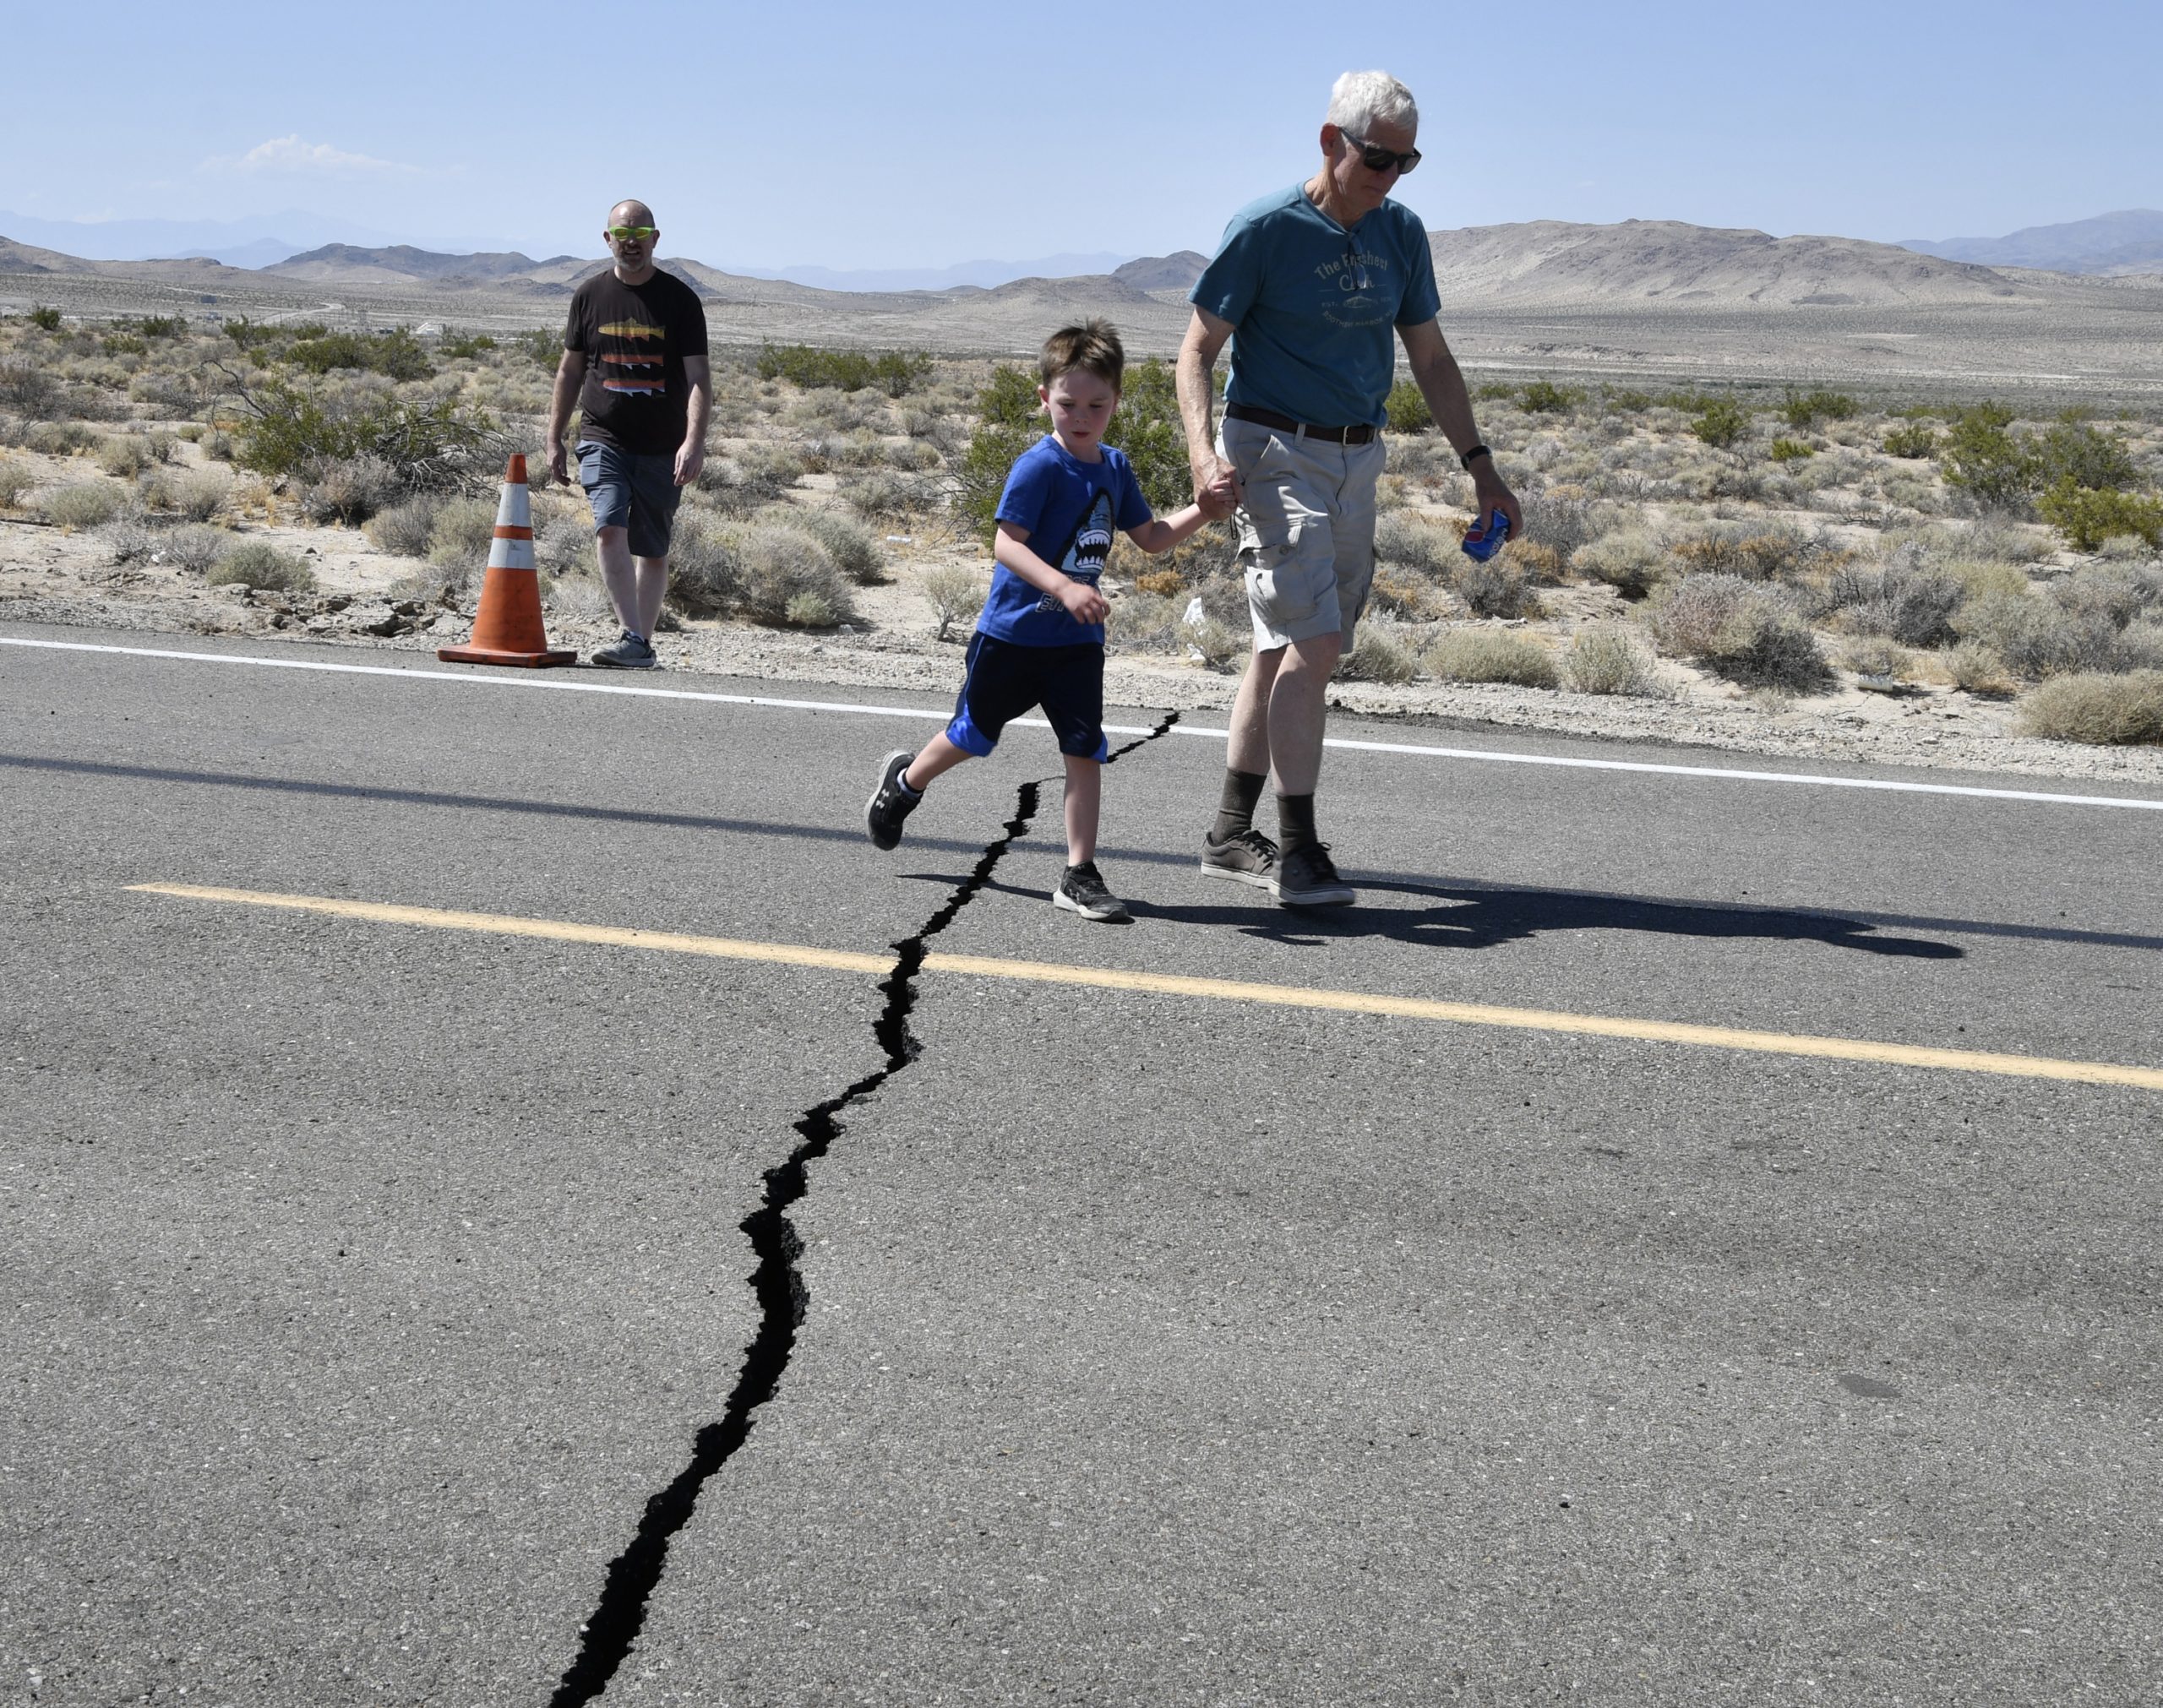 One of many cracks scene on the road of 178 east of Ridgecrest  after magnitude 6.4 earthquake struck Thursday morning in the Mojave Desert's Searles Valley on the Fourth of July and resulting in multiple injuries and structure fires in the city of Ridgecrest CA, JULY 4,2019



People throughout Southern California reported feeling the powerful 10:33 a.m. quake, whose epicenter was located about 62 miles north-northwest of Barstow, according to the U.S. Geological Survey.



The San Bernardino County Fire Department said multiple buildings in its jurisdiction sustained minor cracks, multiple water mains ruptured, and several power lines were down. No fires erupted in that county.

Photo by Gene Blevins/Contributing Photographer.